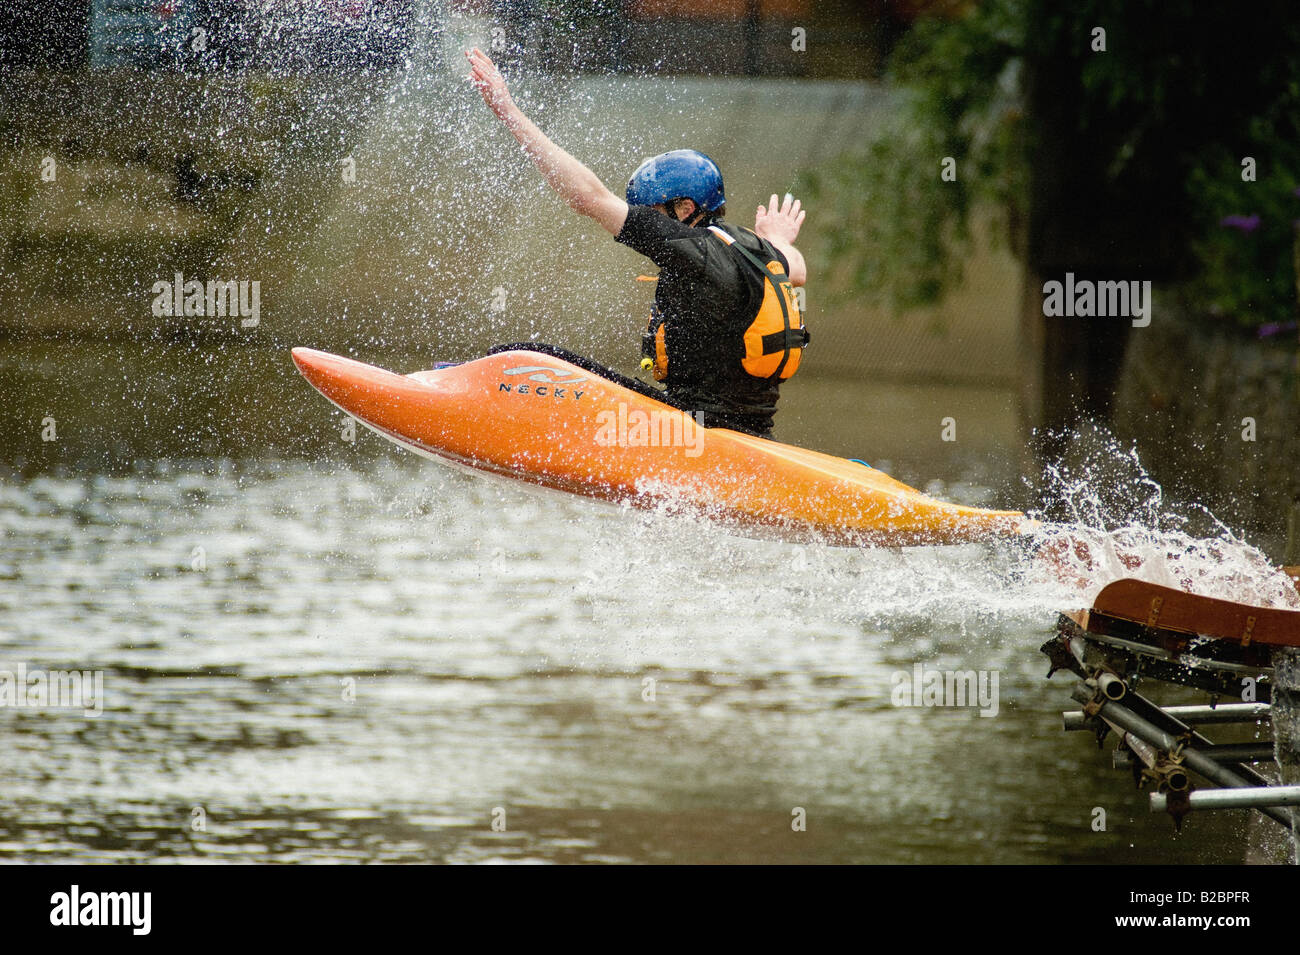 Kayaker performing an aerial manoeuvre on the river Foss in York, UK Stock Photo